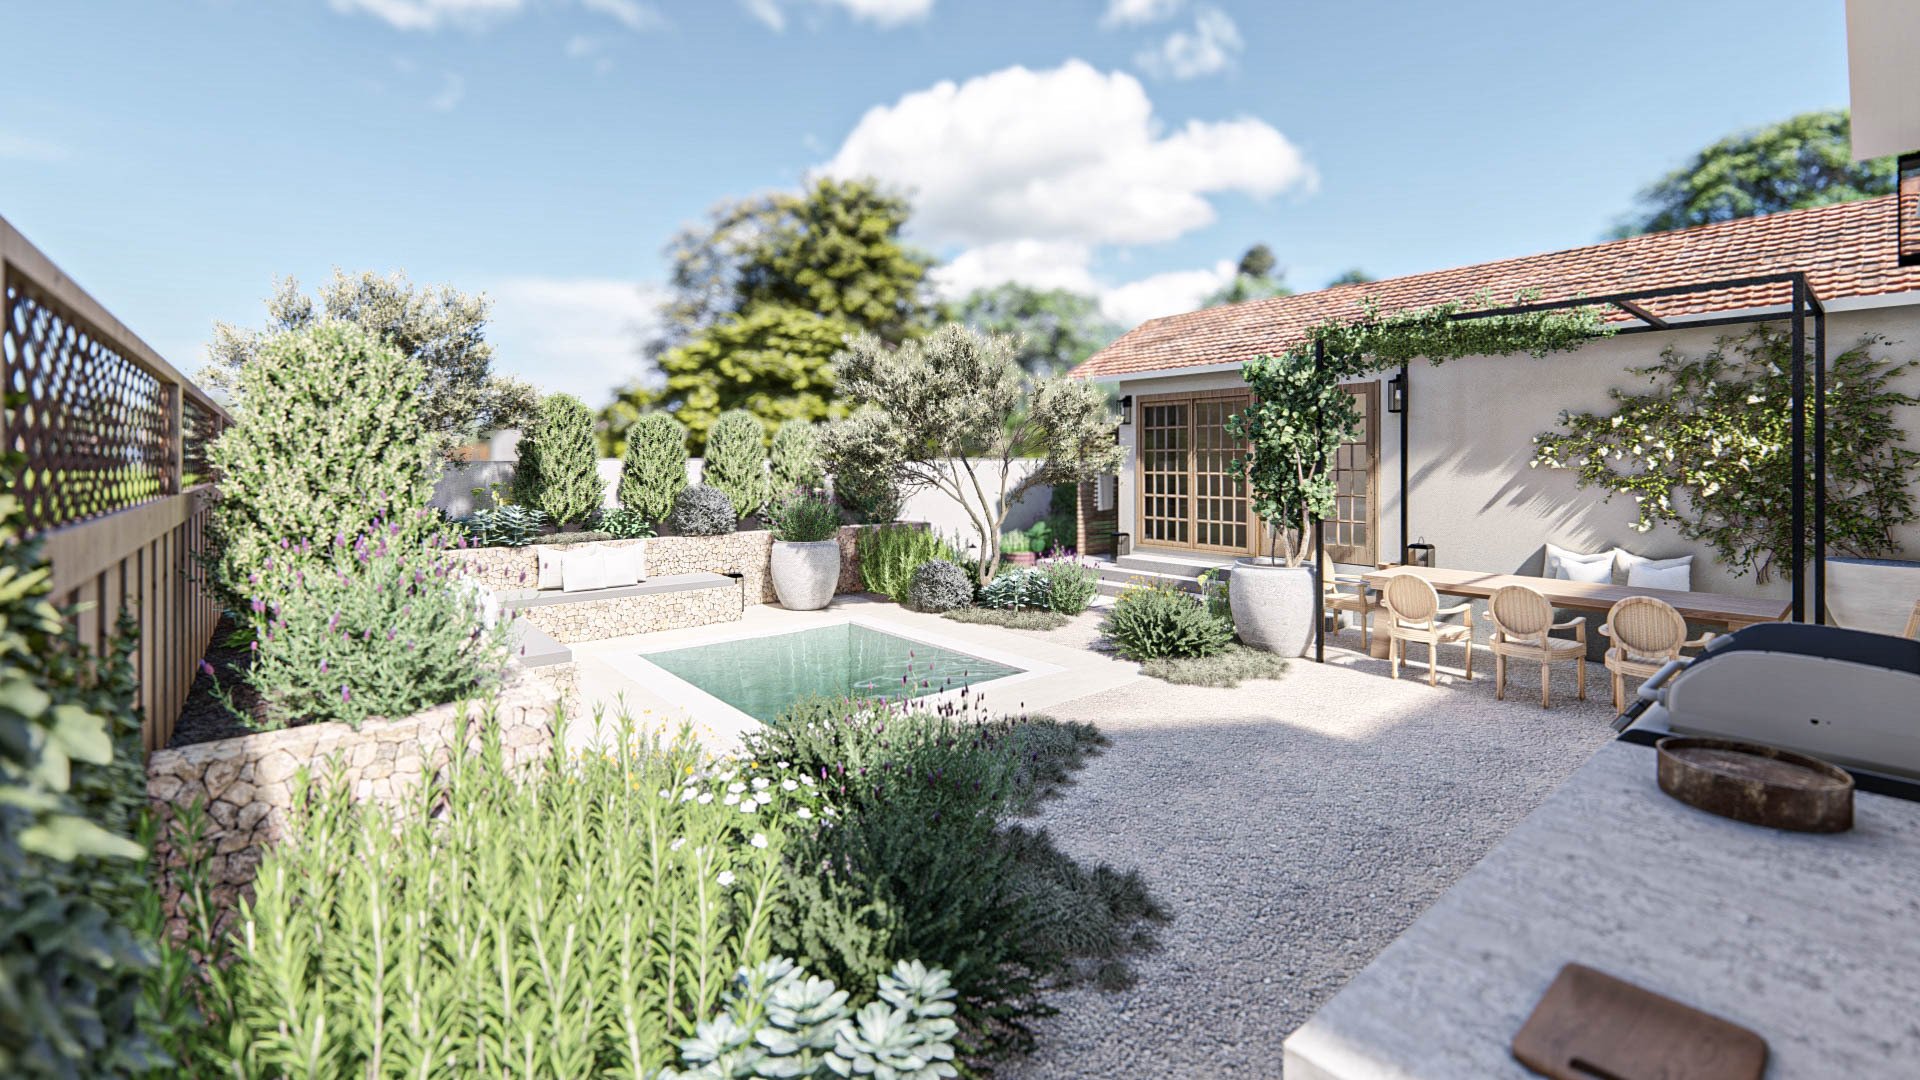 Fenced yard with plunge pool, a sitting area under pergola, pea gravel floor, and plants